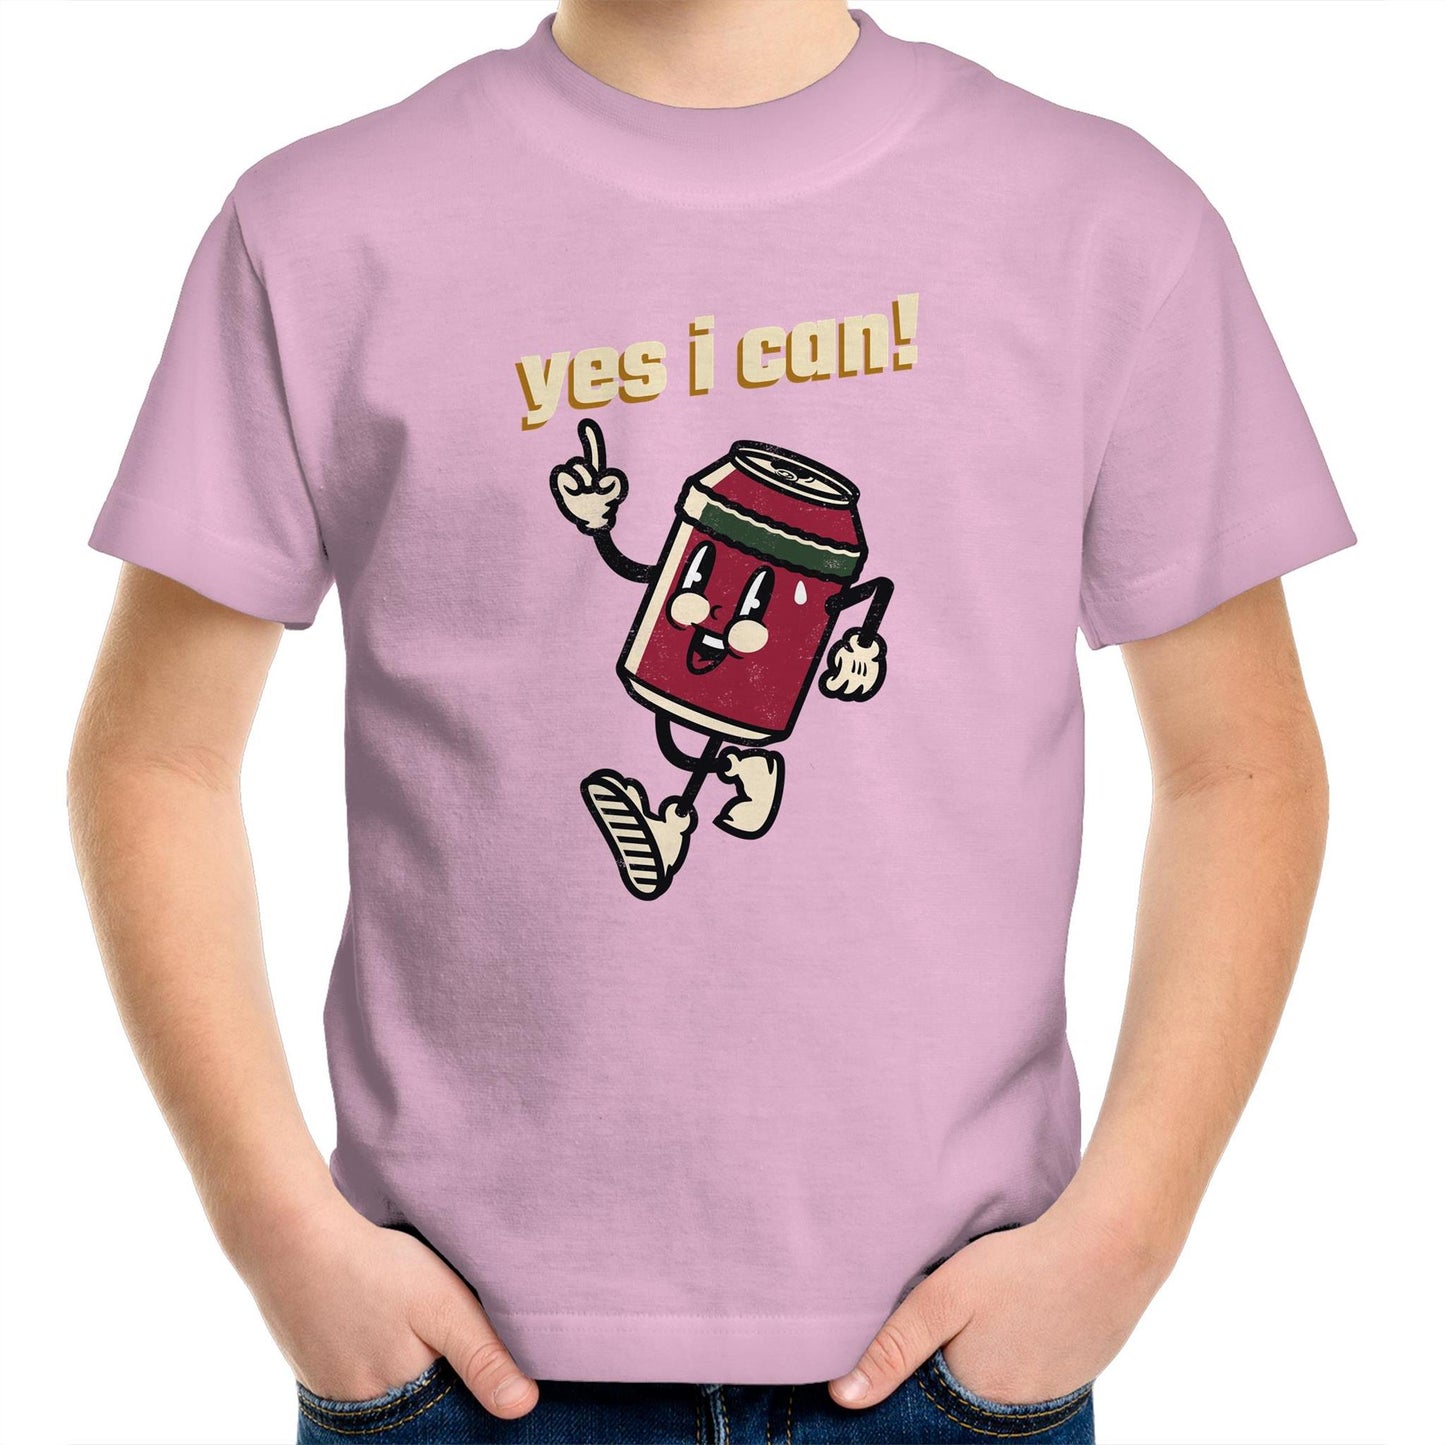 Yes I Can! - Kids Youth Crew T-Shirt Pink Kids Youth T-shirt Motivation Retro